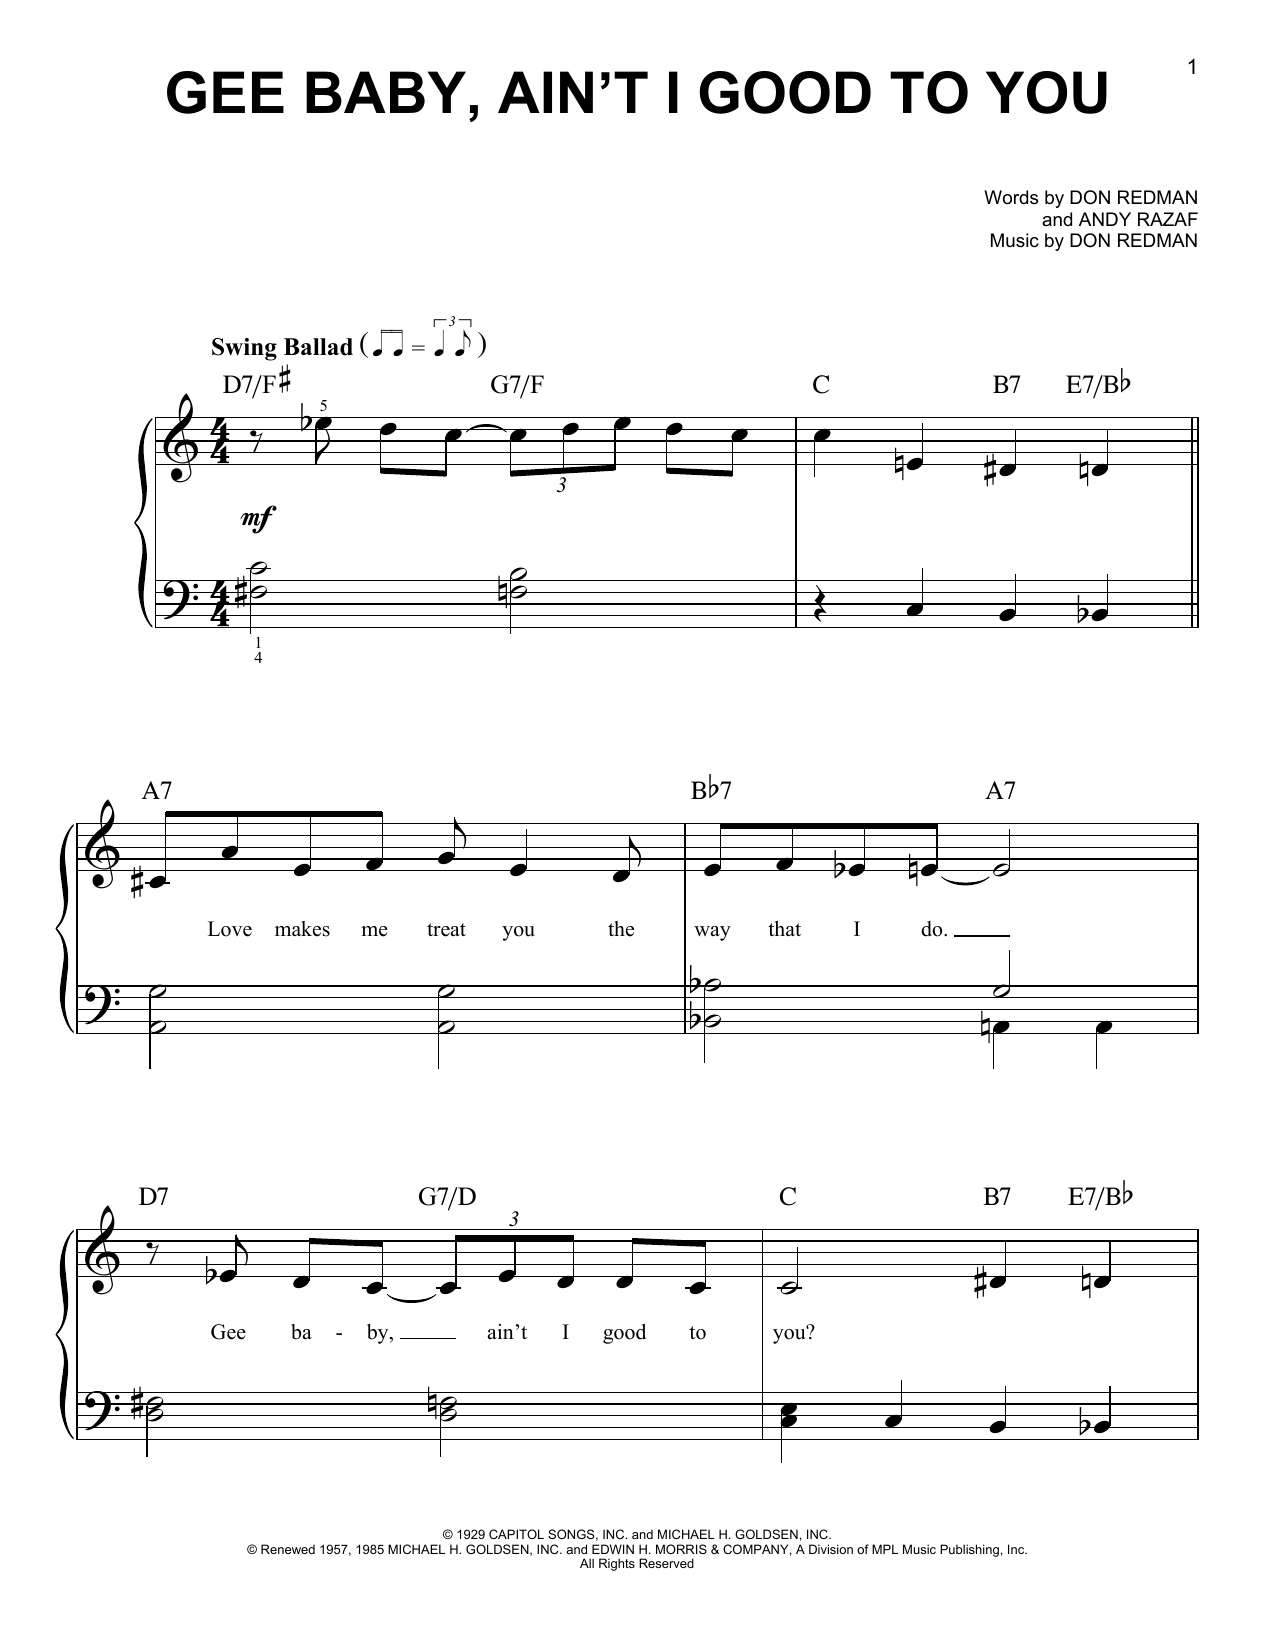 Download The King Cole Trio Gee Baby, Ain't I Good To You Sheet Music